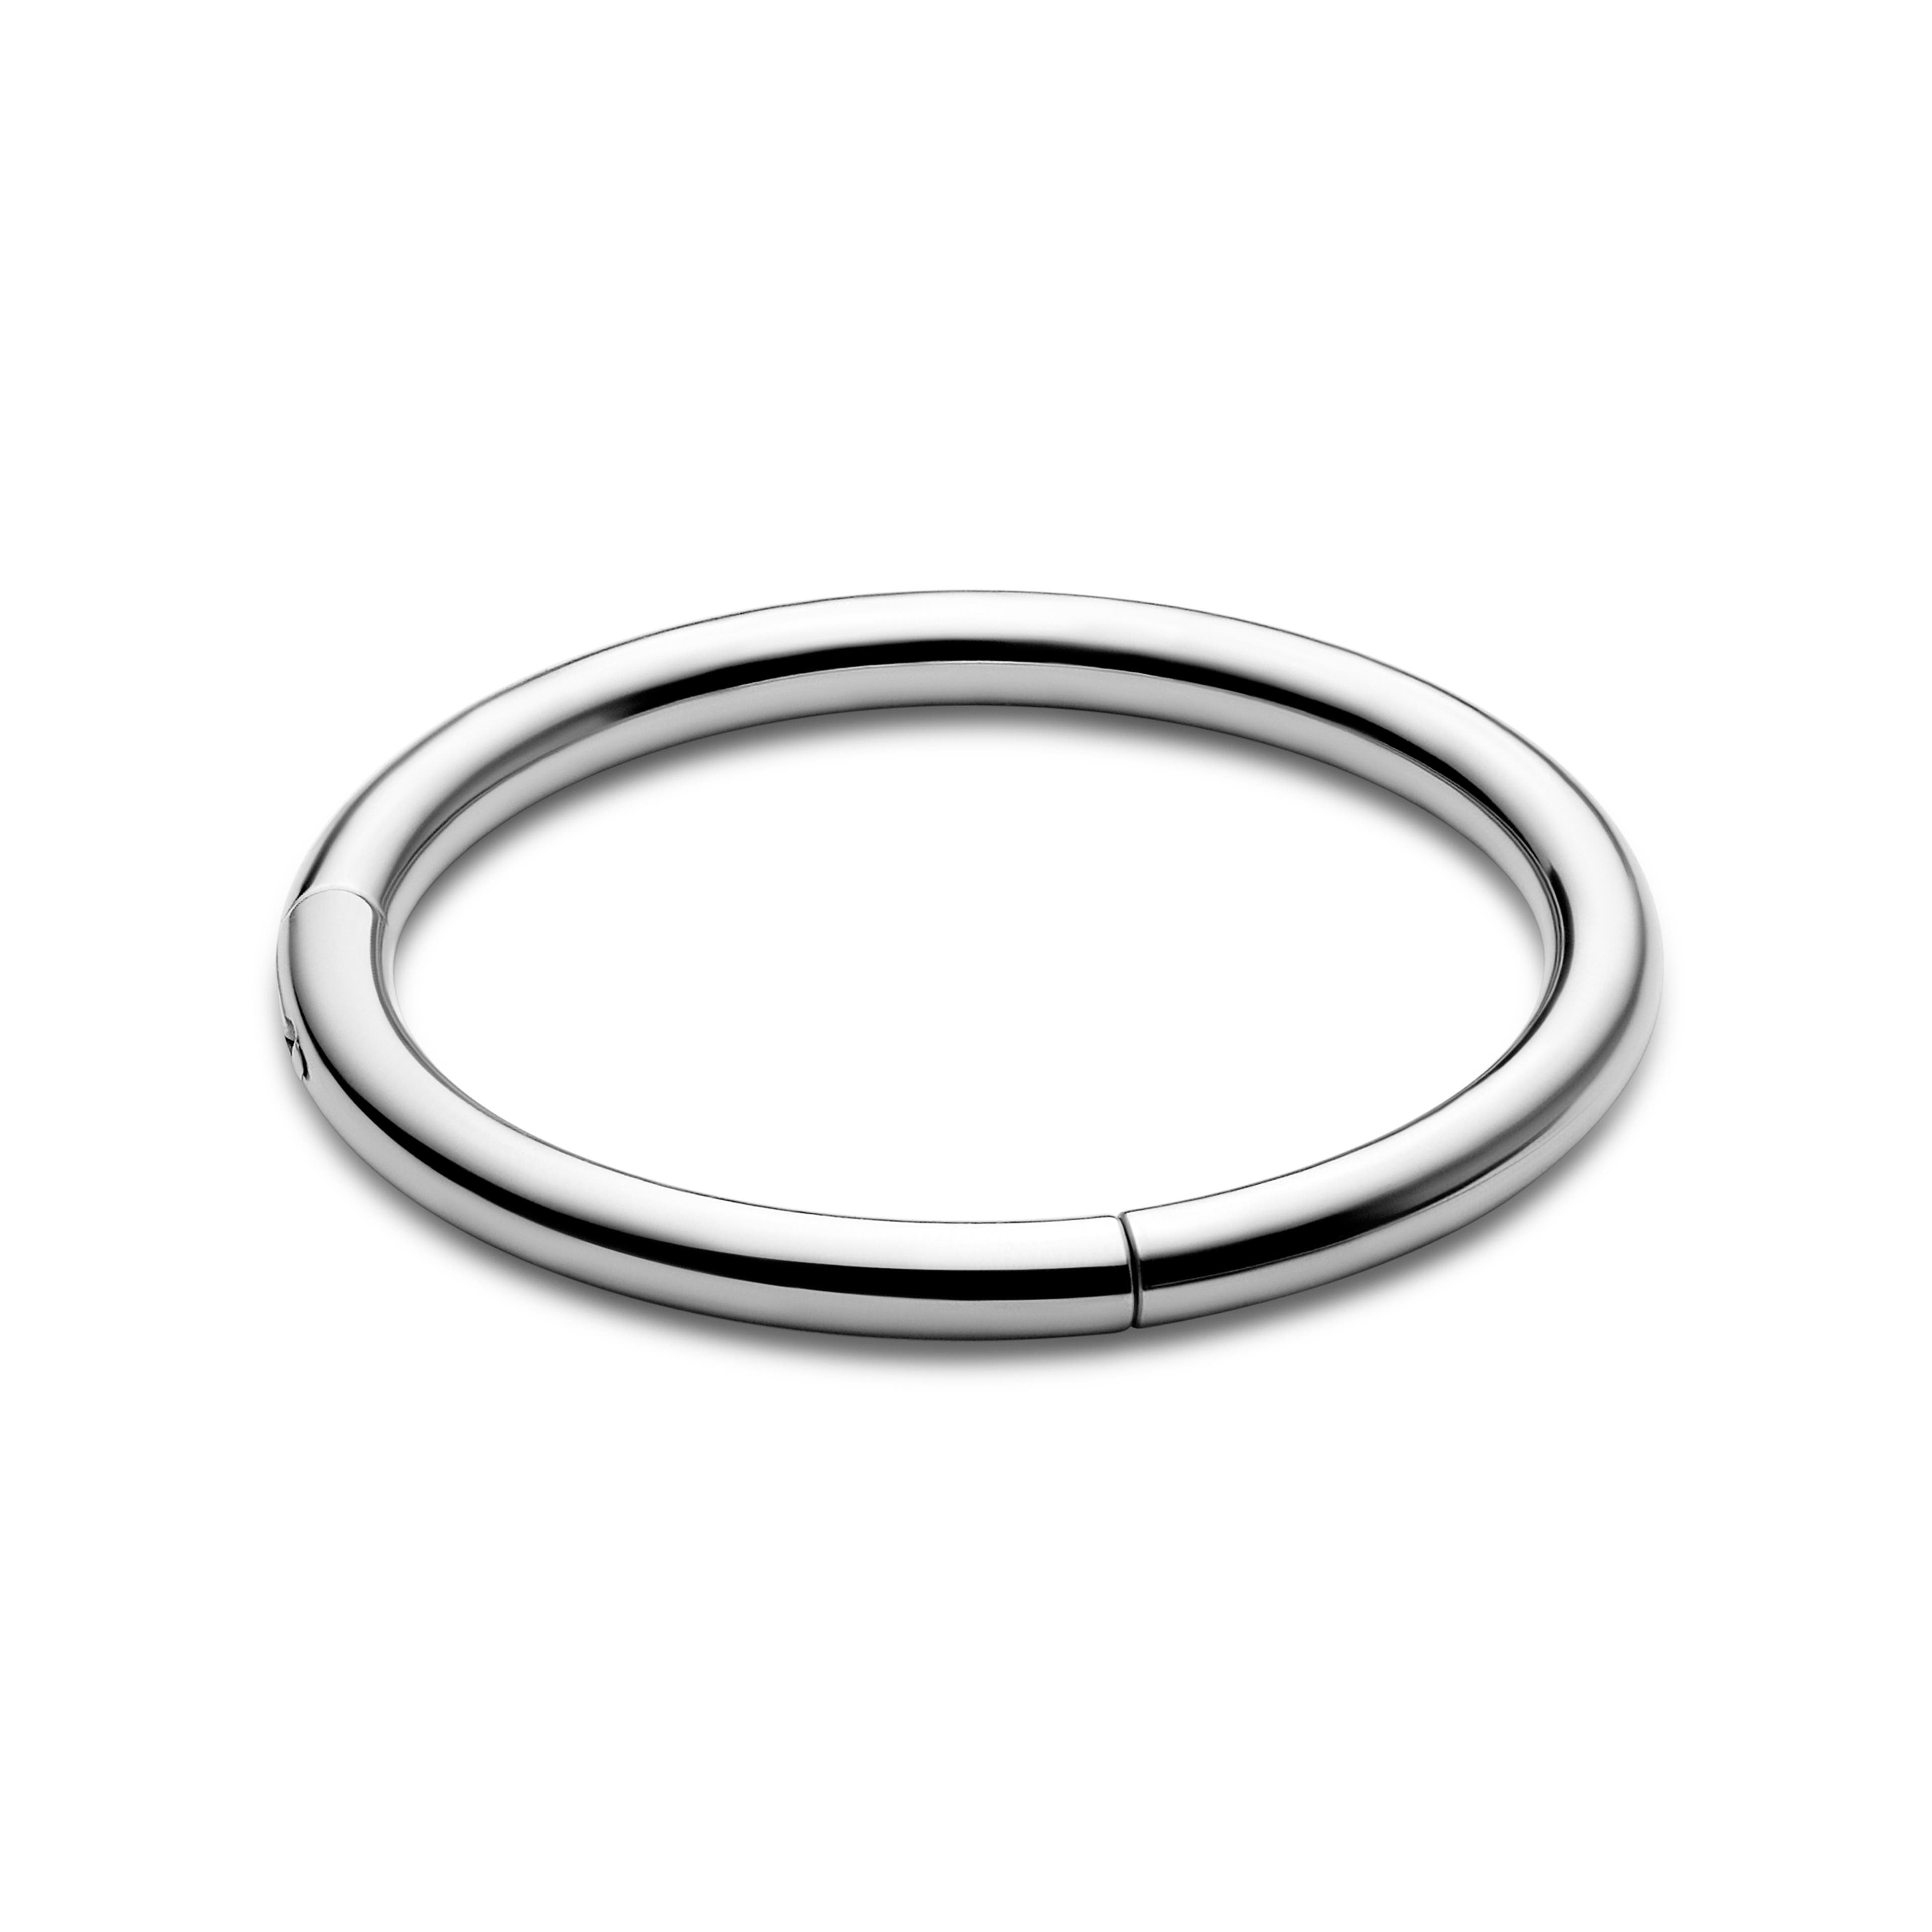 7 mm Silver-tone Surgical Steel Piercing Ring